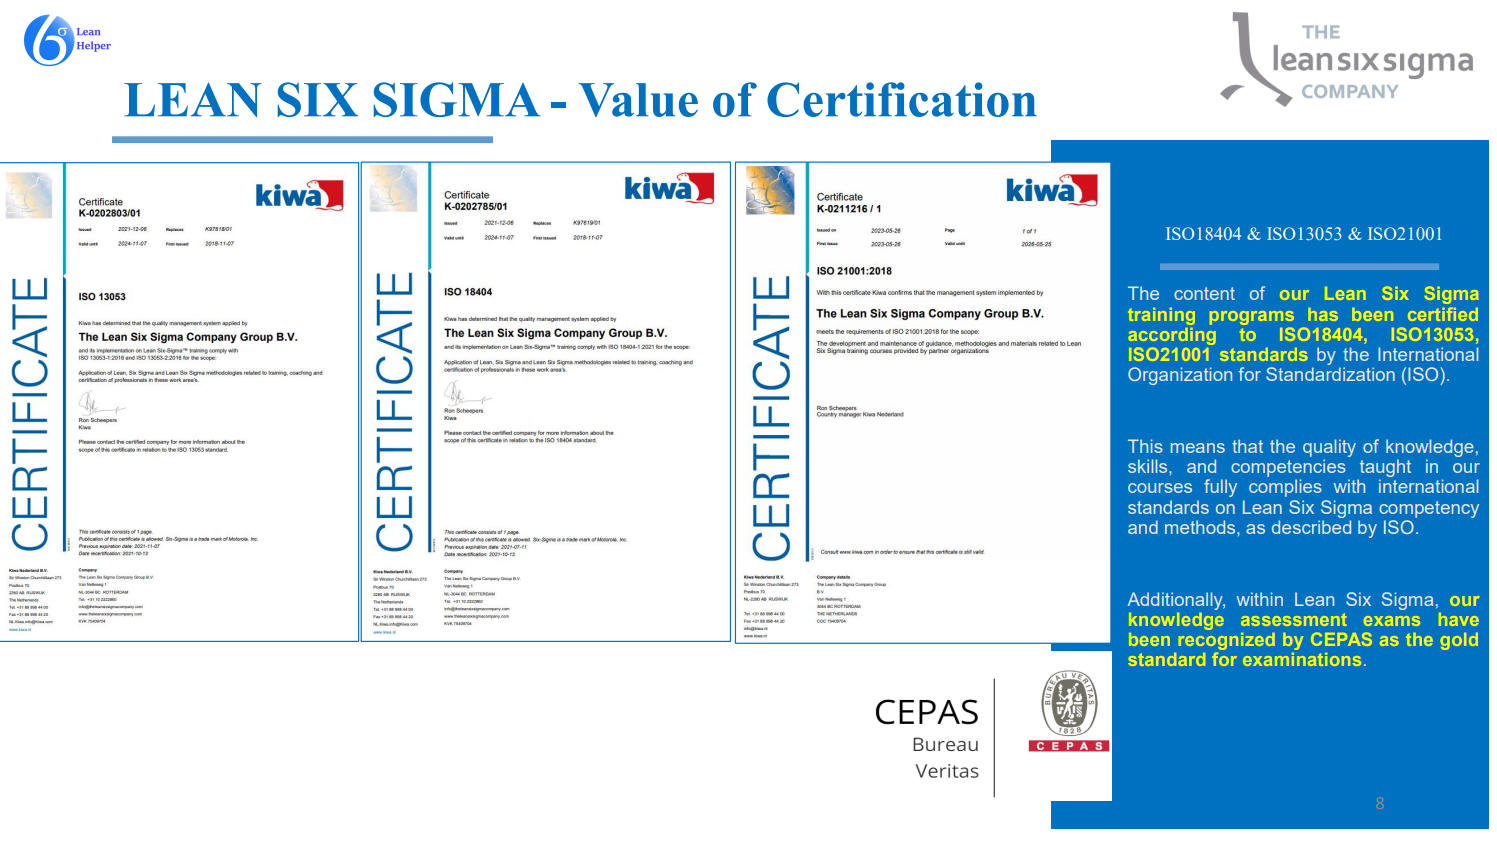 Value of certifications